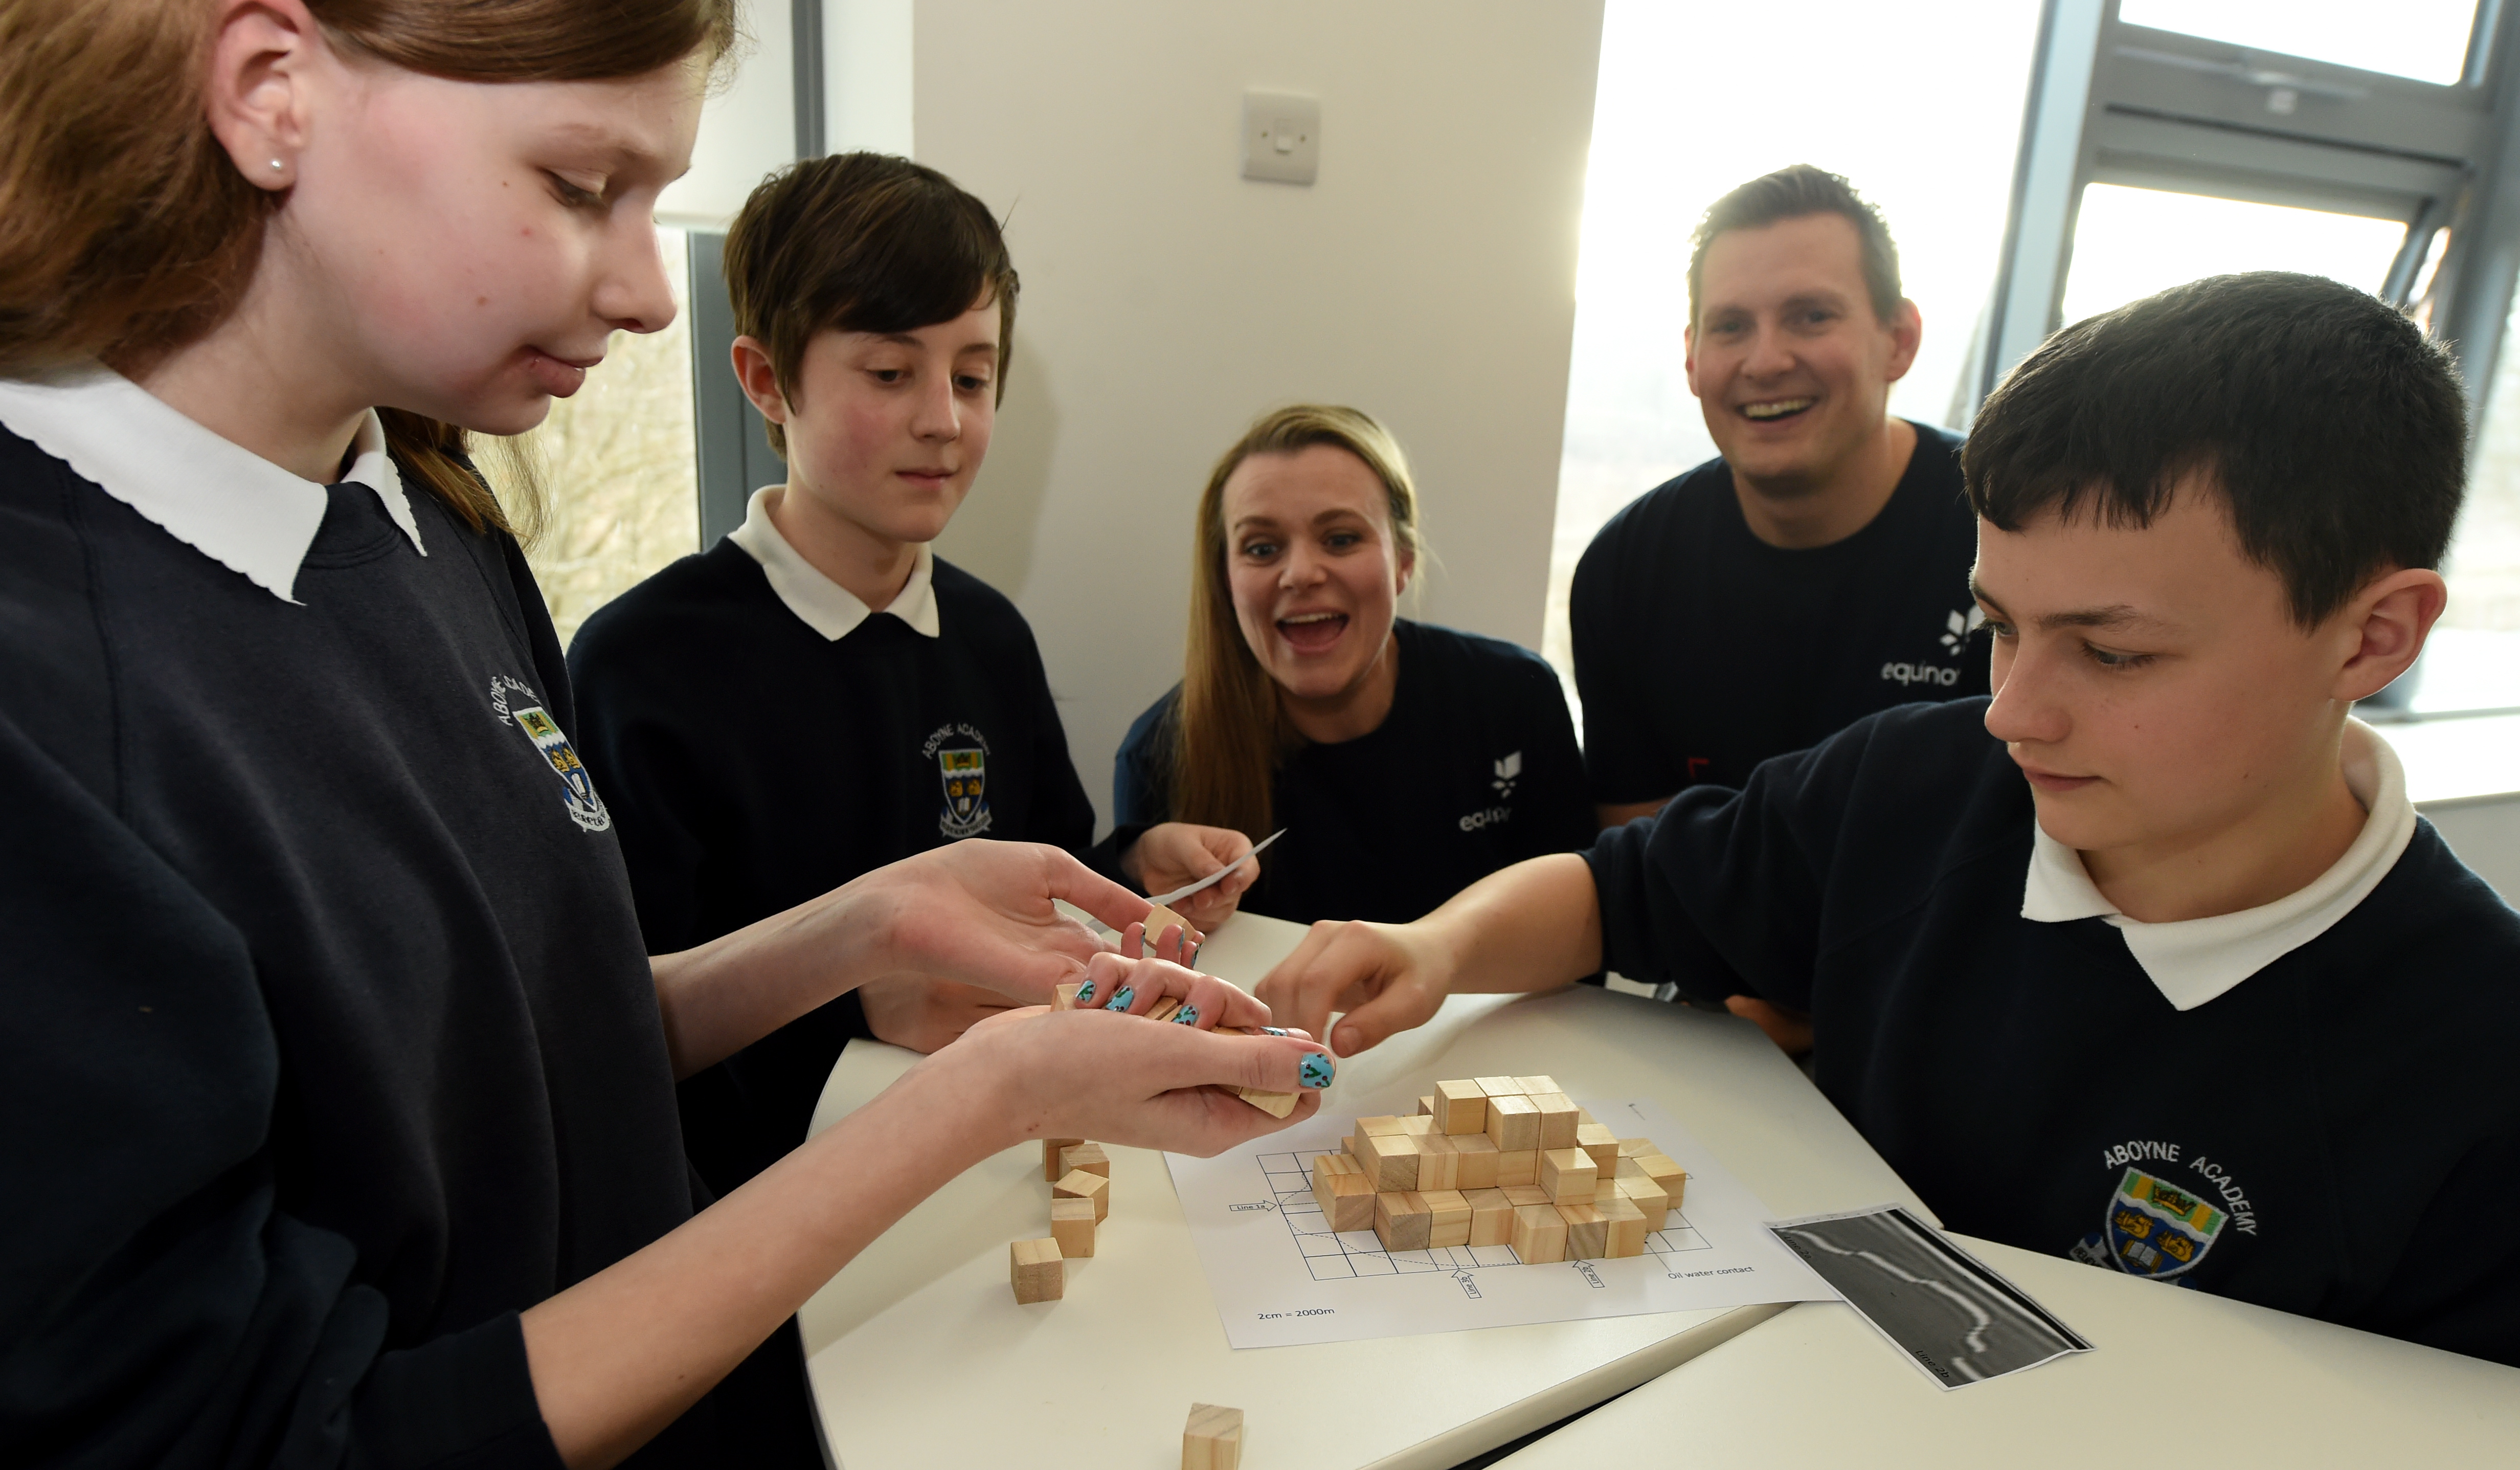 Sarah Chew, managing director of Techfest and Arne Gurtner, Equinor senior vice president UK with pupils from Aboyne Academy. Picture by Jim Irvine